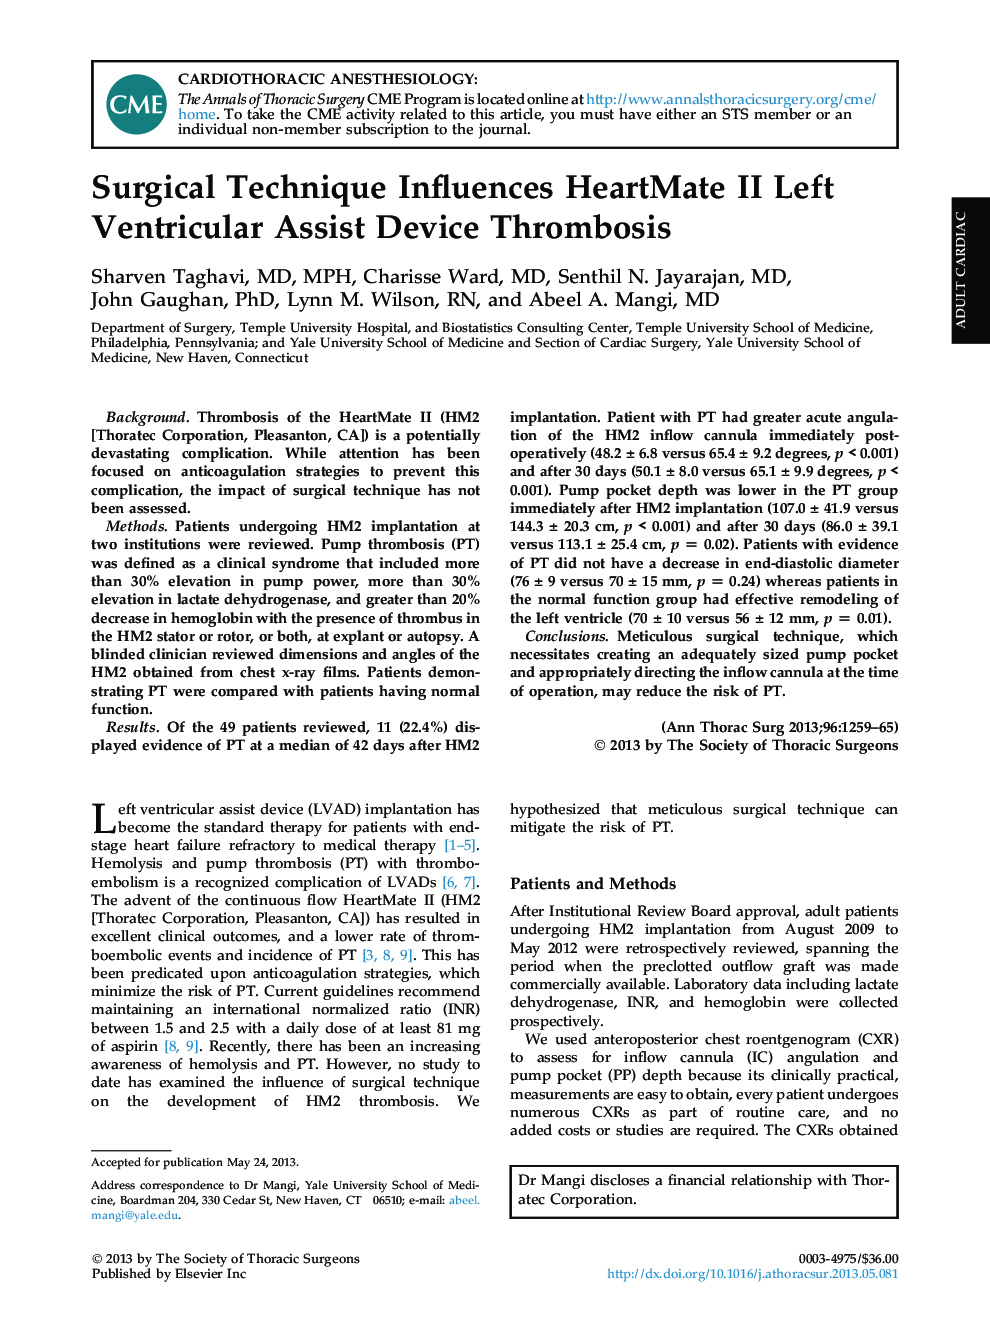 Surgical Technique Influences HeartMate II Left Ventricular Assist Device Thrombosis